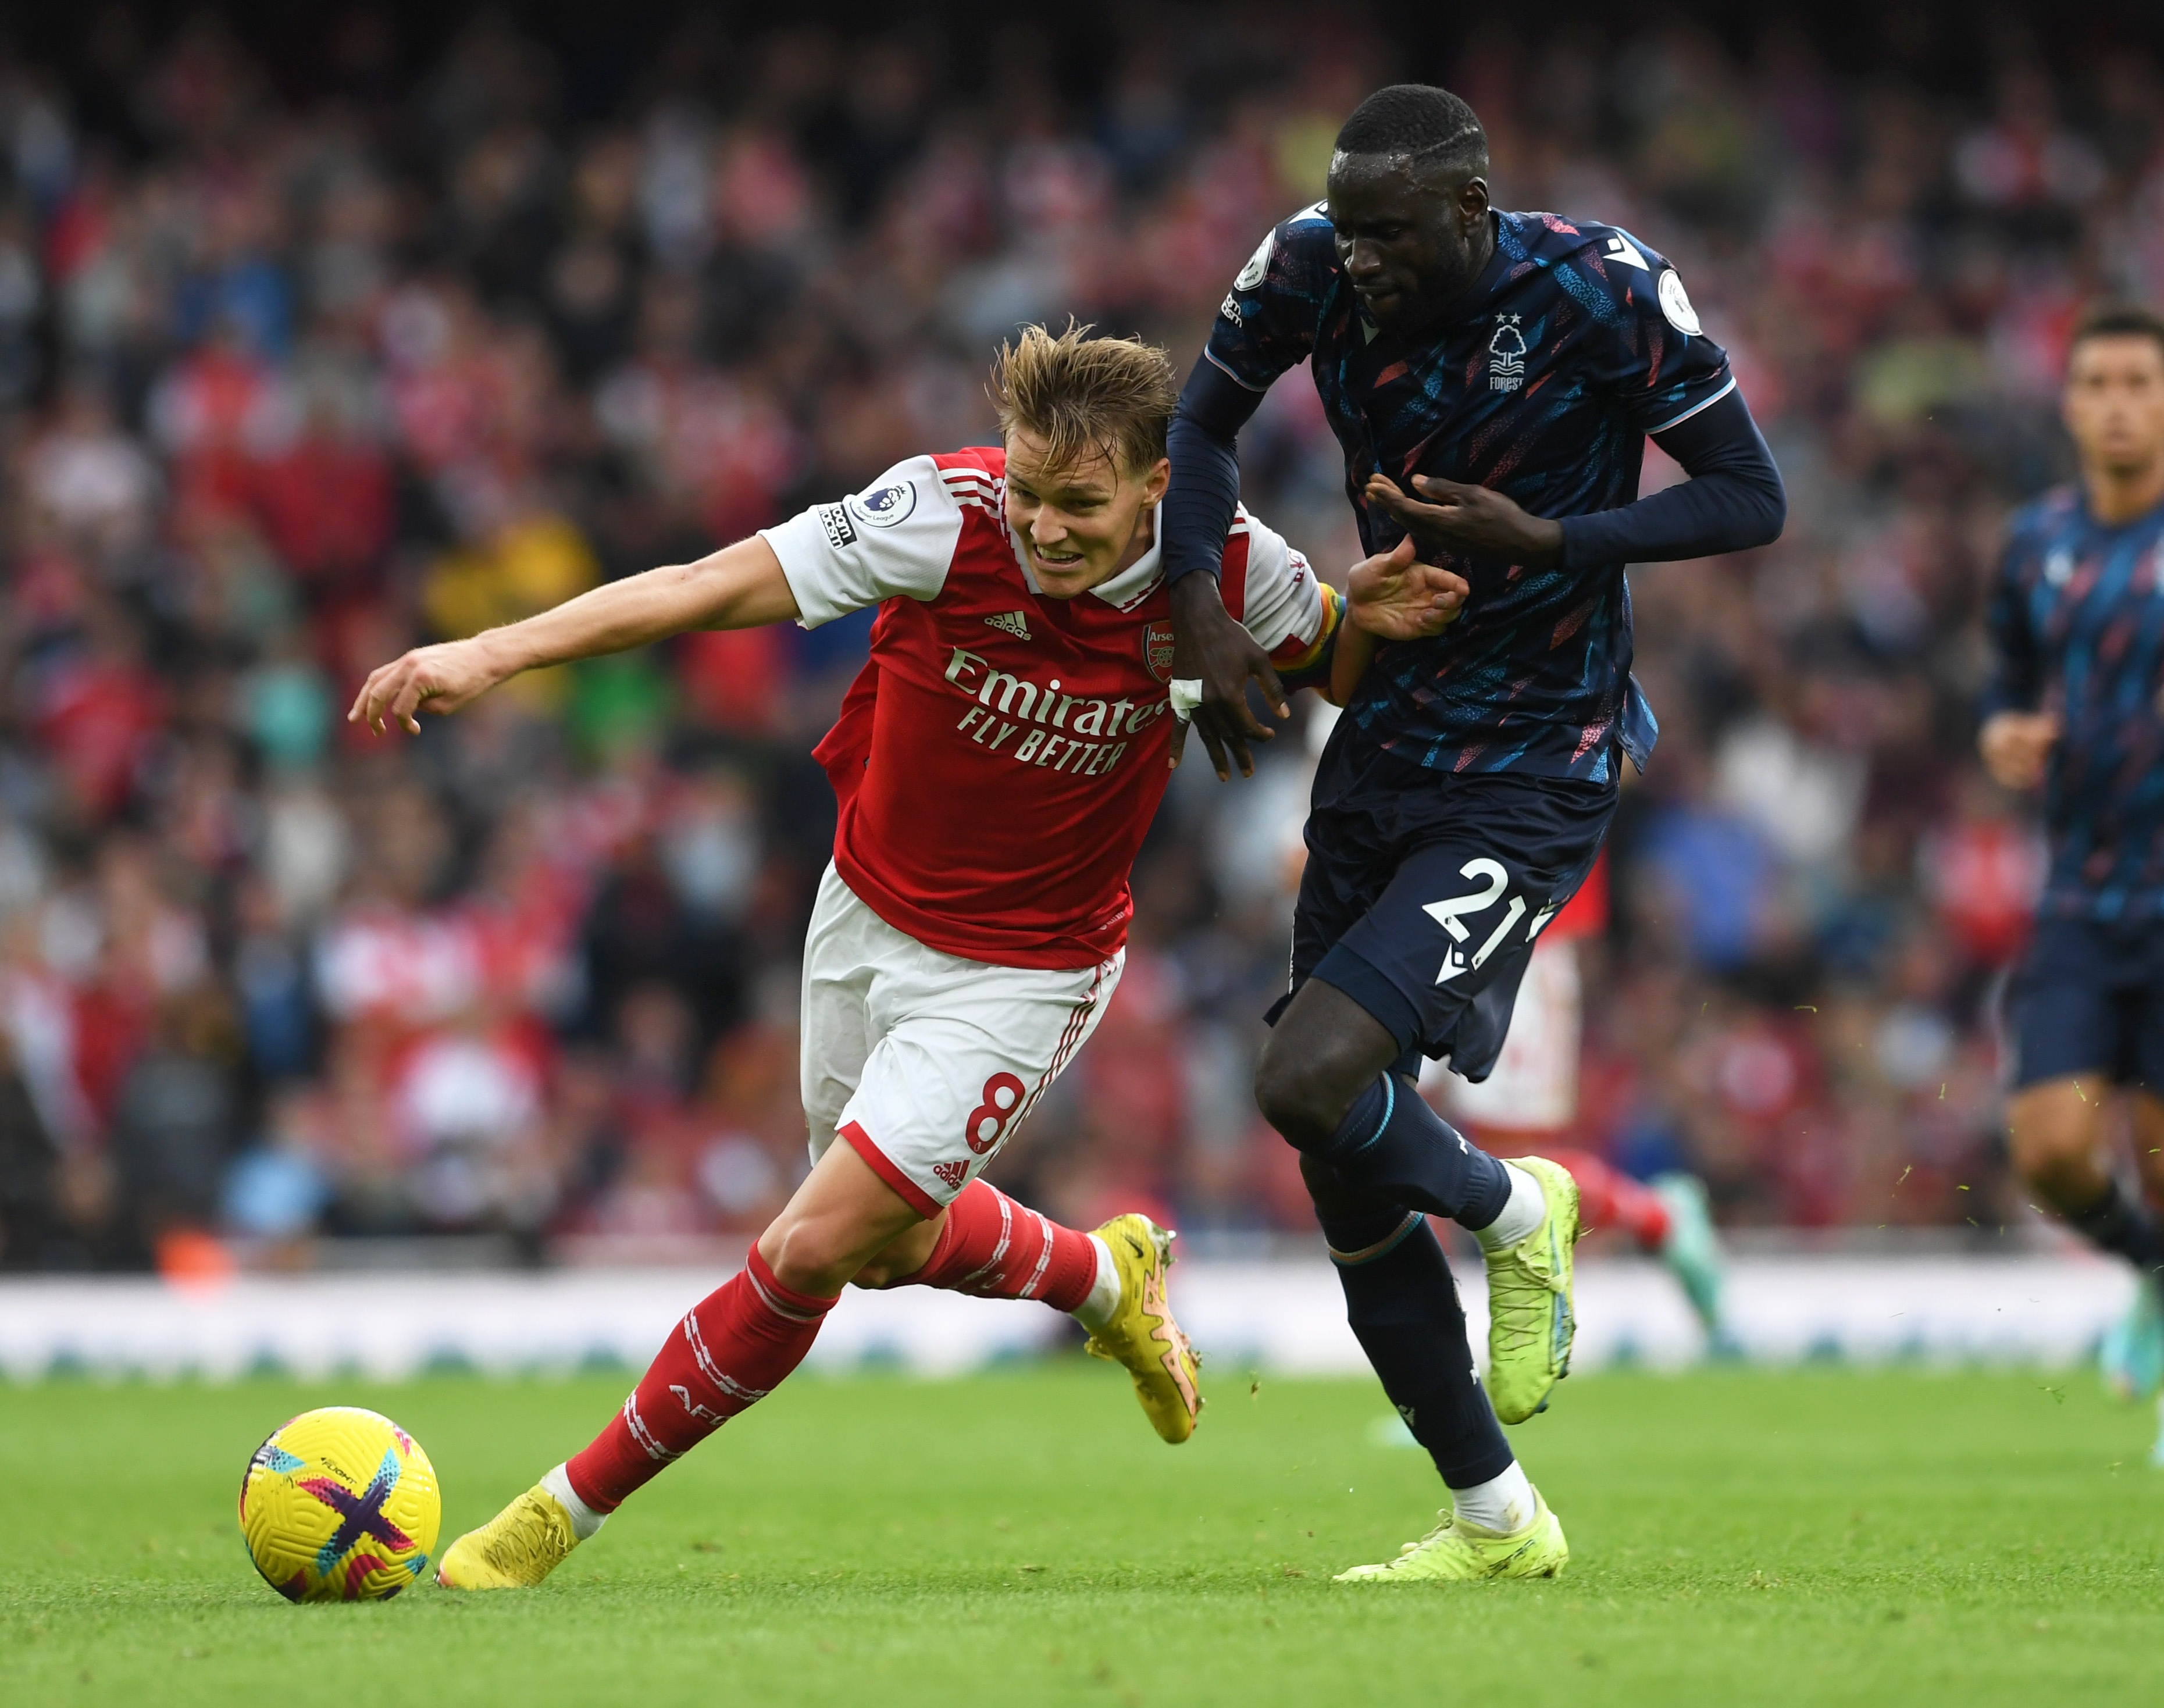 , Arsenal star man Martin Odegaard was called ‘Norwegian Messi’ and Pep Guardiola vowed to make him best in the world